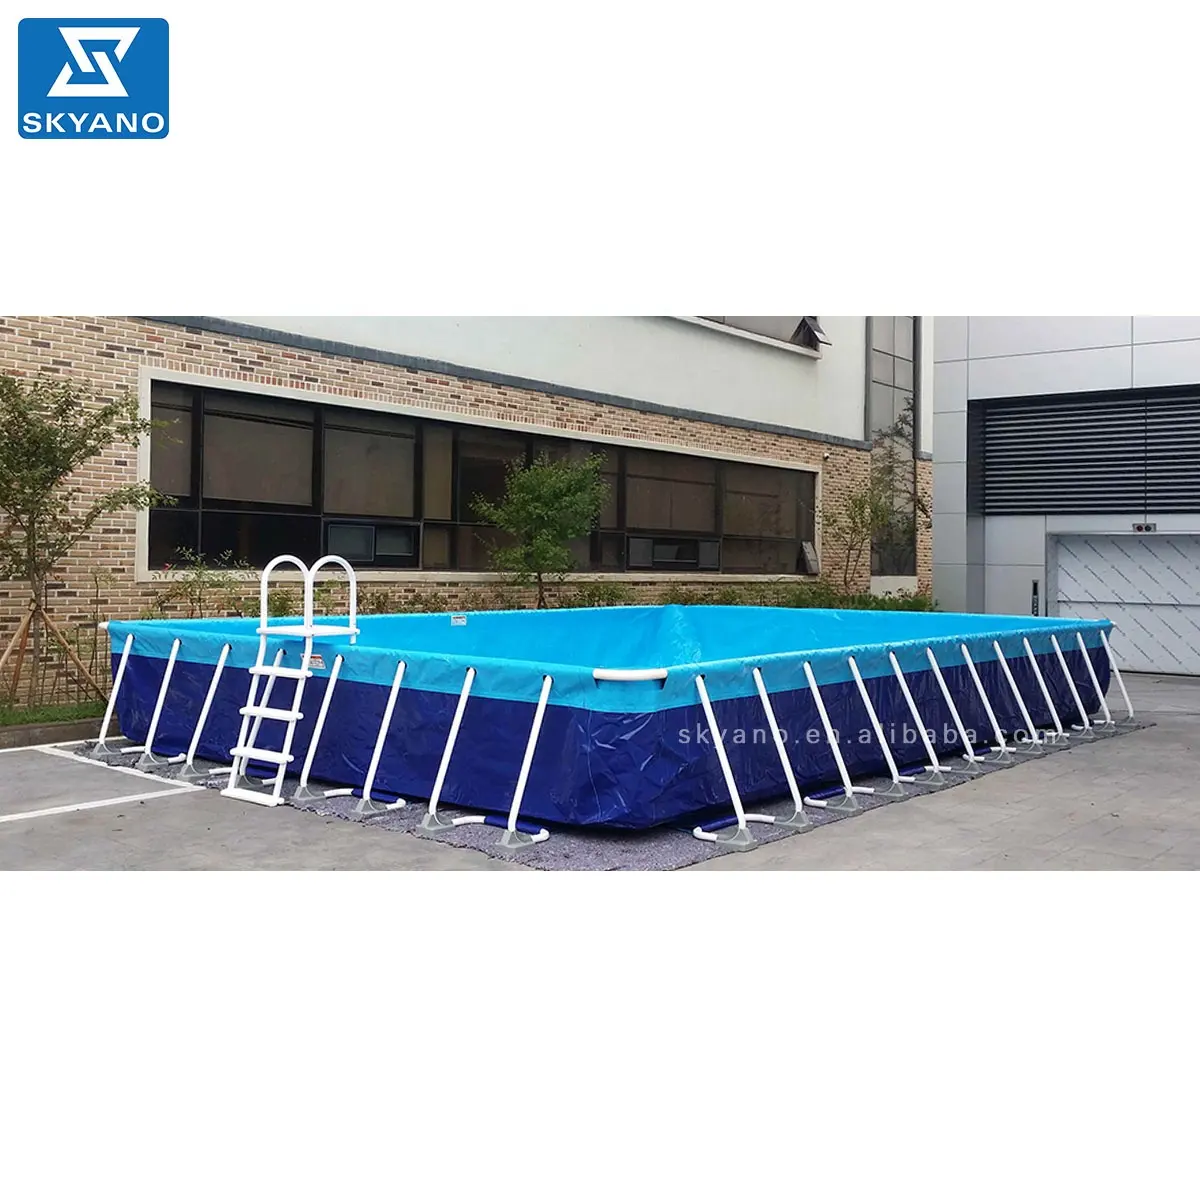 Large Commercial Metal Frame Steel Removable Swimming Pool Above Ground Water Park Pool